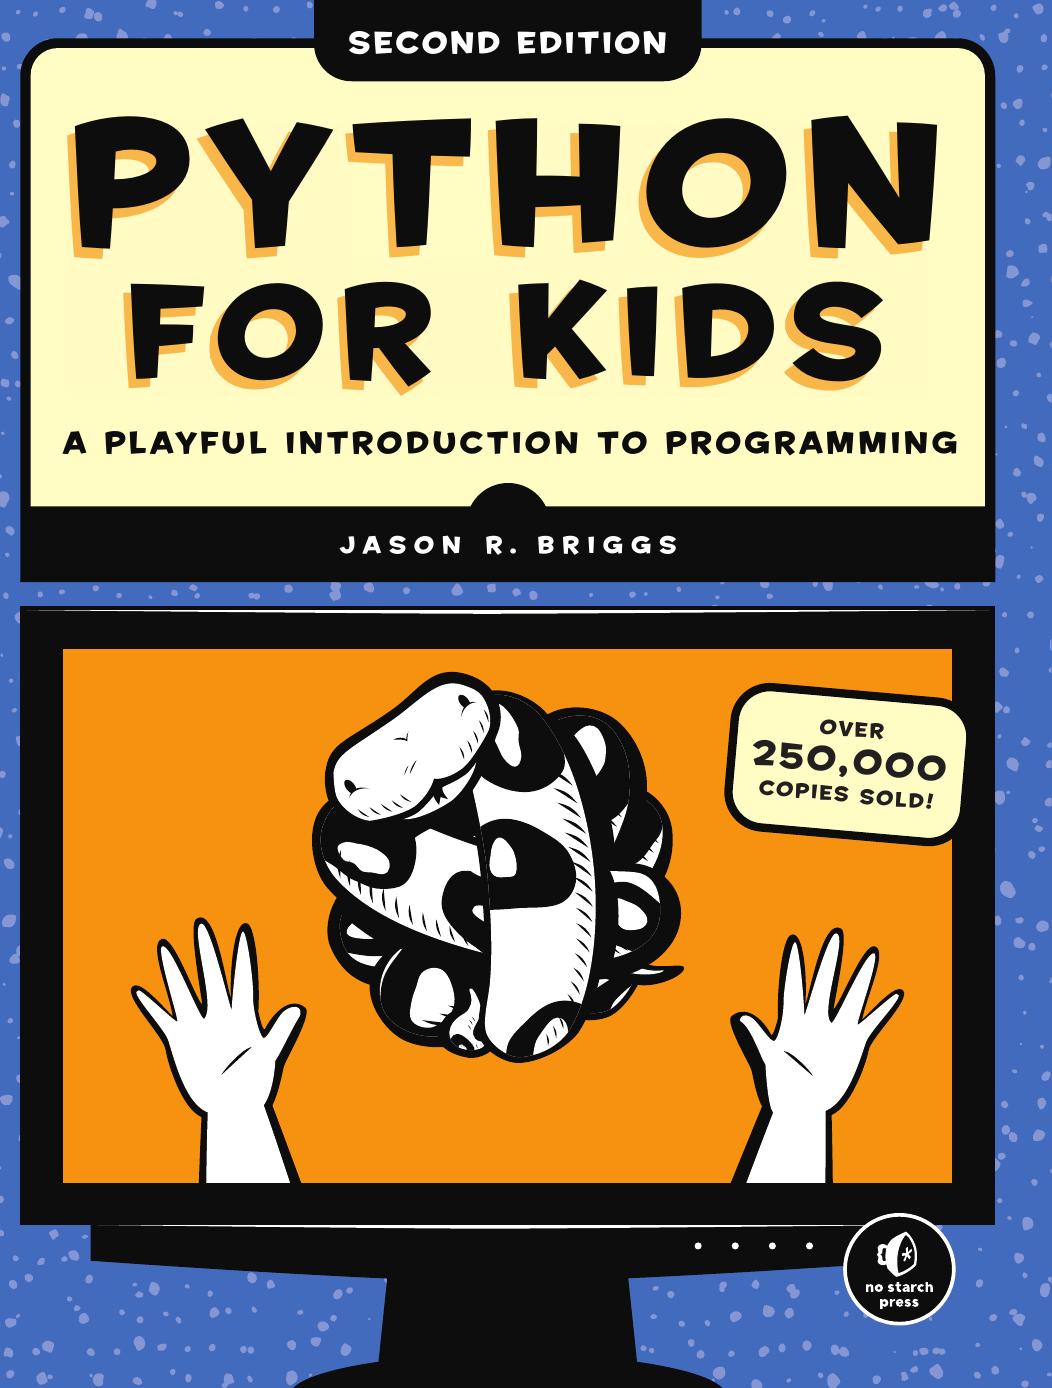 Python for Kids, 2nd Edition by Jason R. Briggs